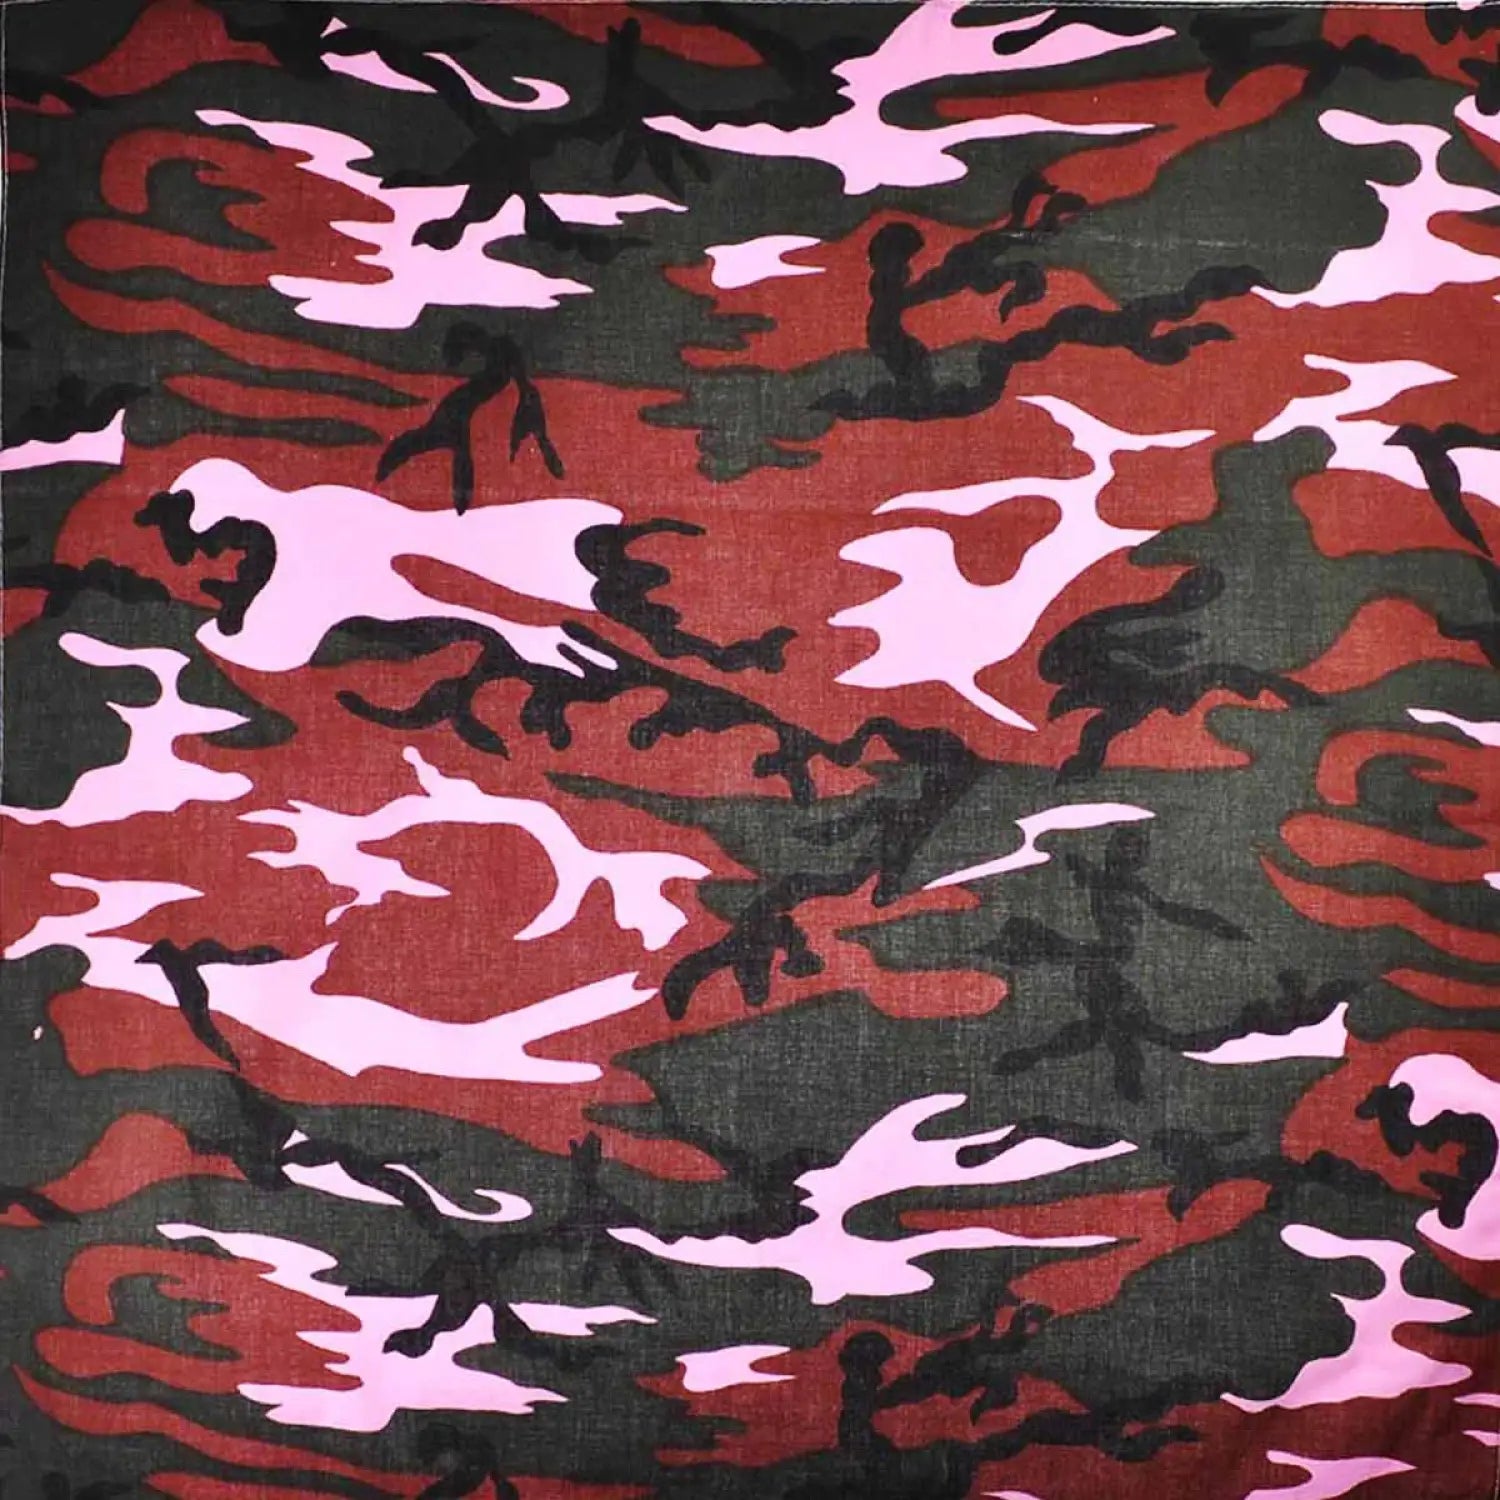 Pink and black camouflage military print bandana made of 100% cotton